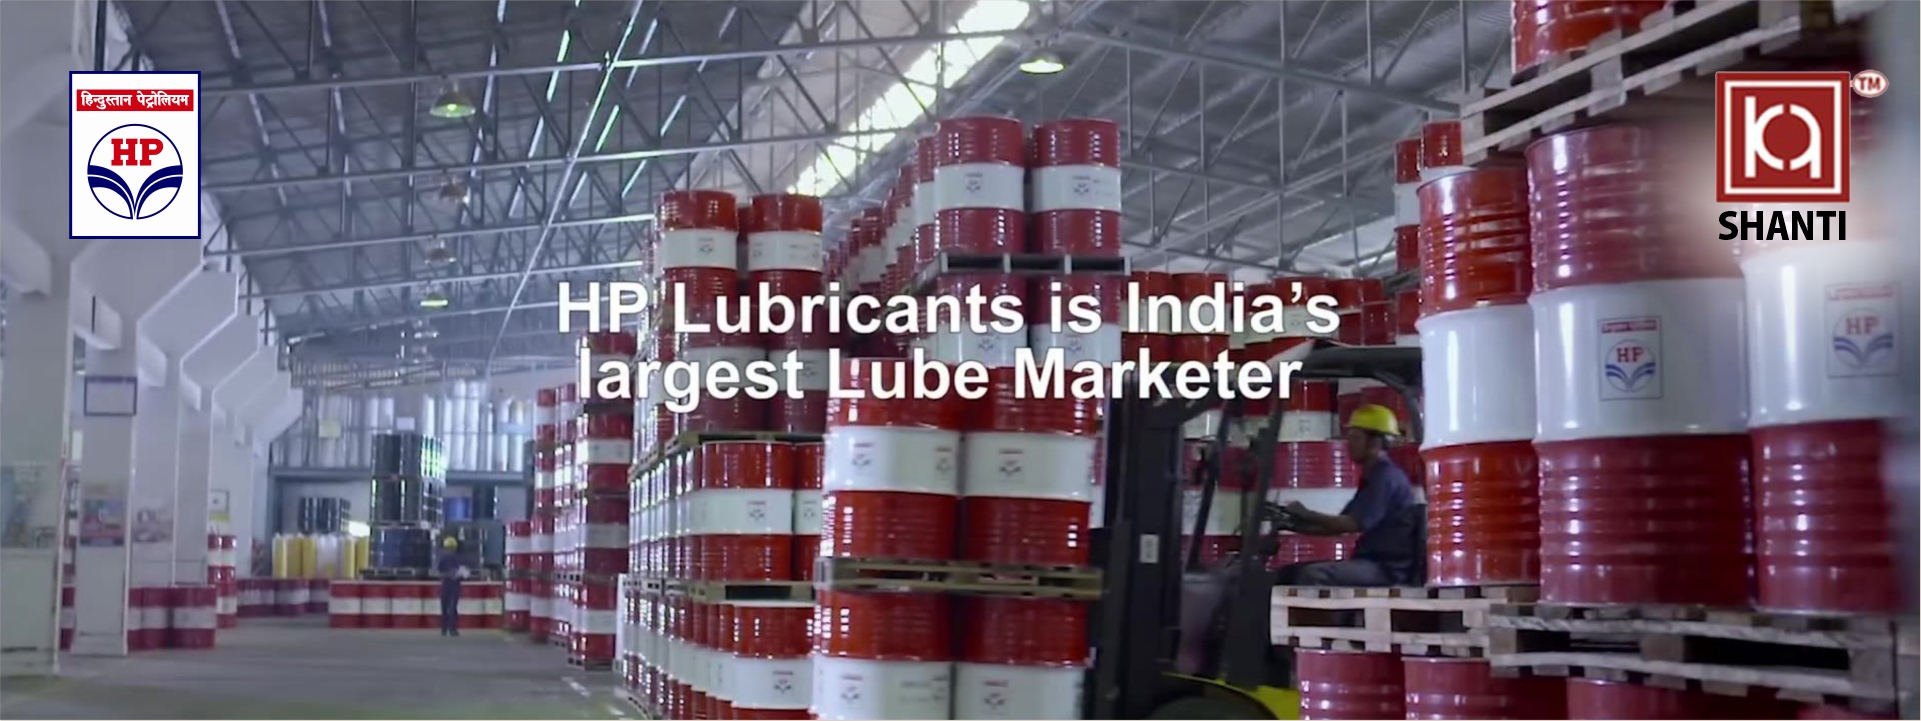 HP DEF, HP Lubricants - India's Largest Lube Marketer